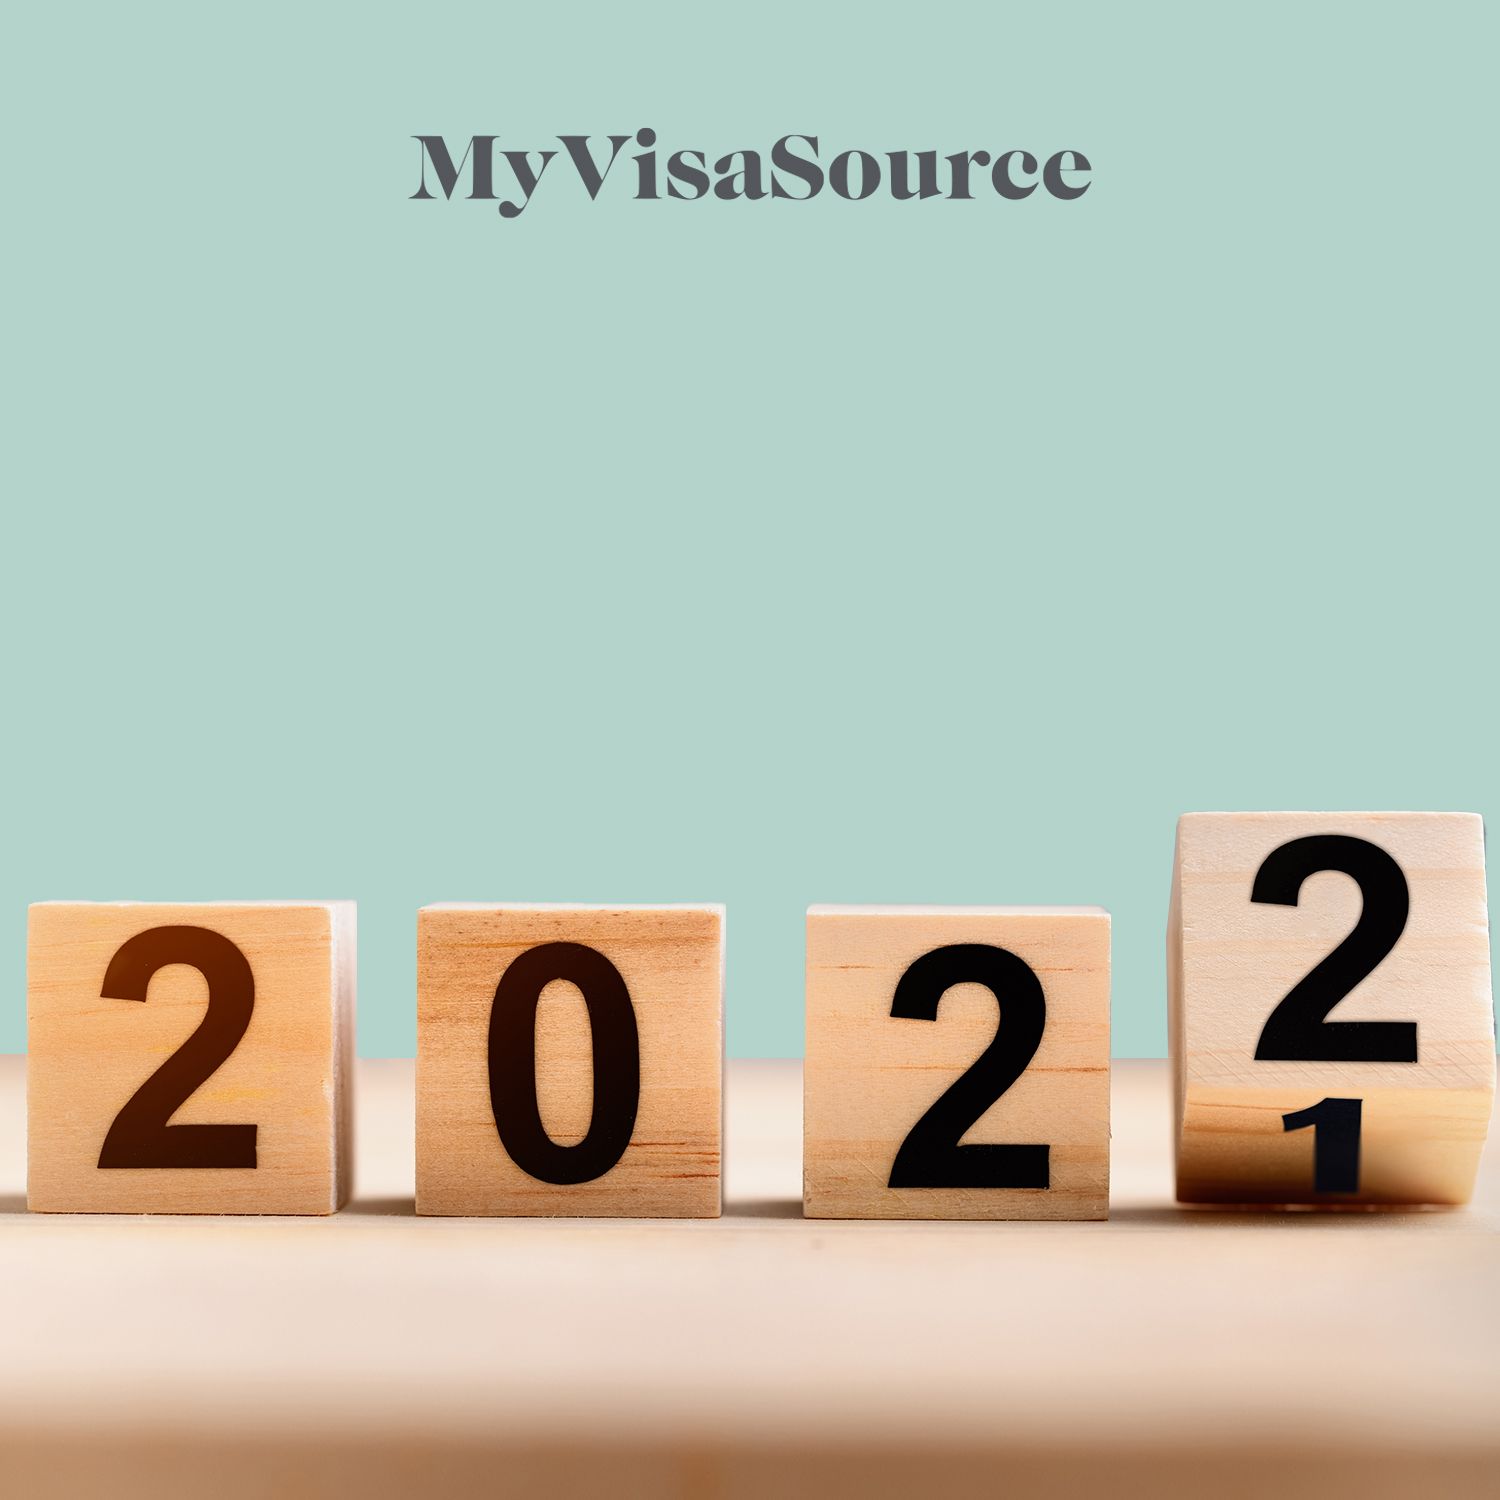 Uscis Completes The H 2b Visa Cap For The First Half Of 2022 My Visa Source 7215